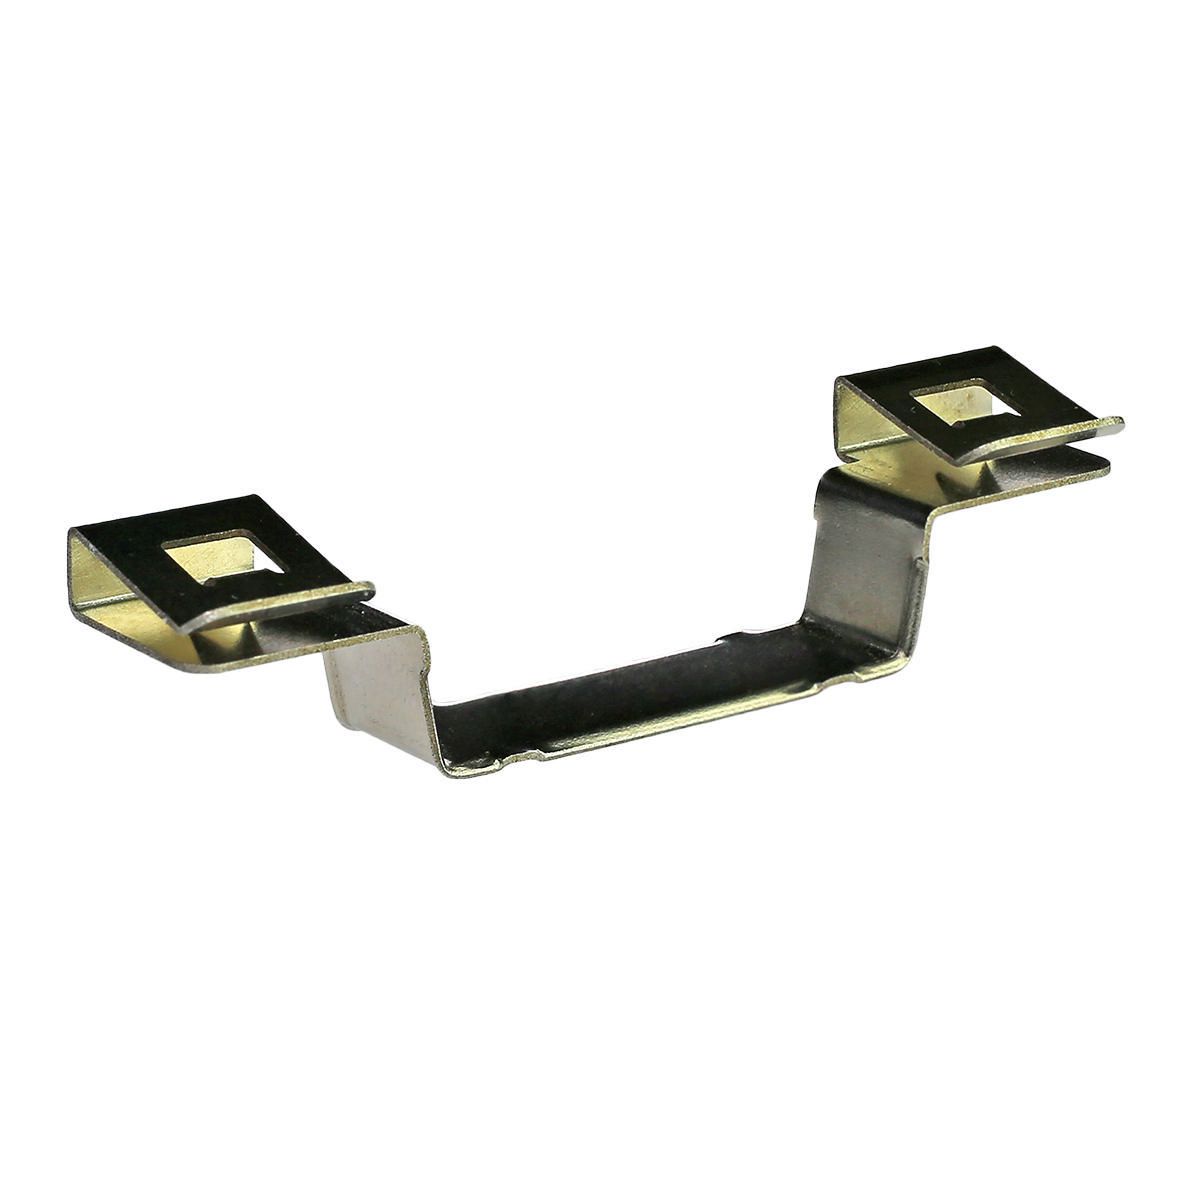 WILEY CABLE CLIP - 4 WIRE 180 DEGREE